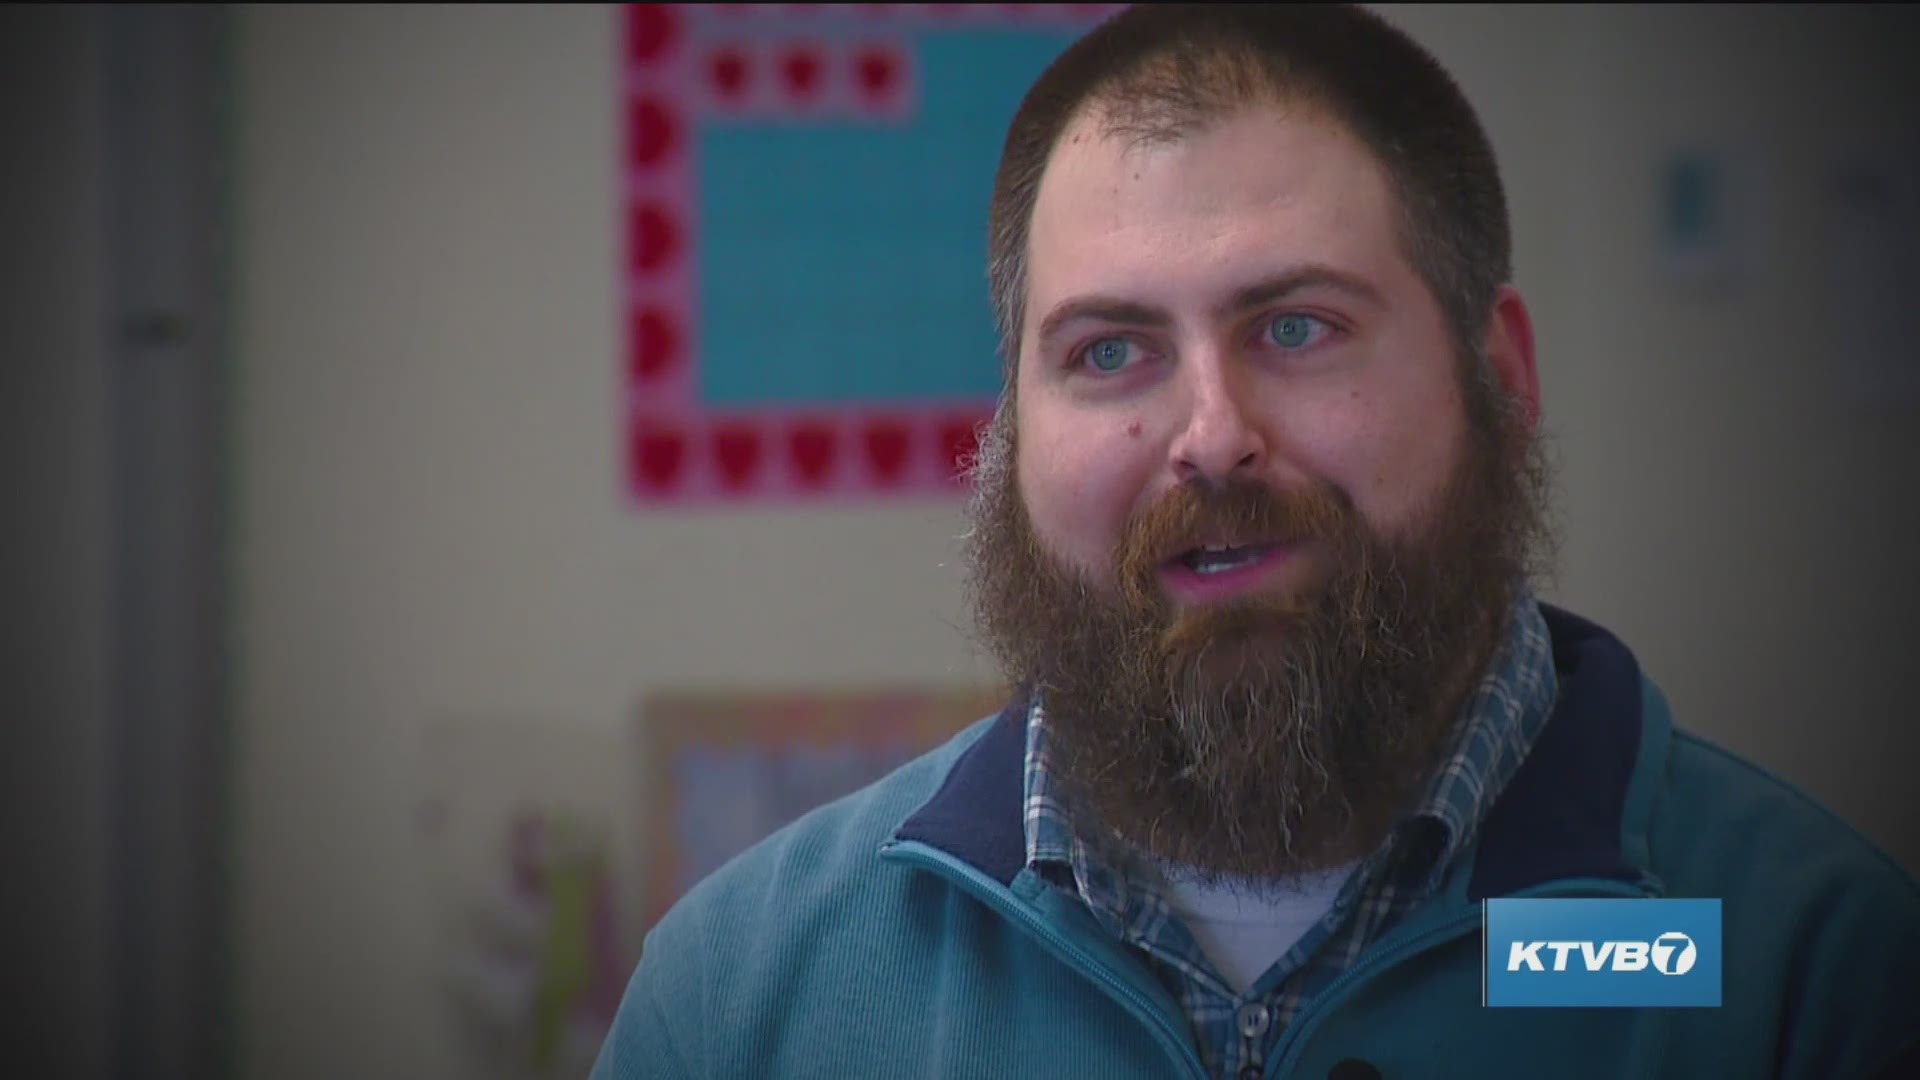 Doug Petcash hosts this half hour special about Innovative Educators. It showcases some of Idaho's most creative teachers.